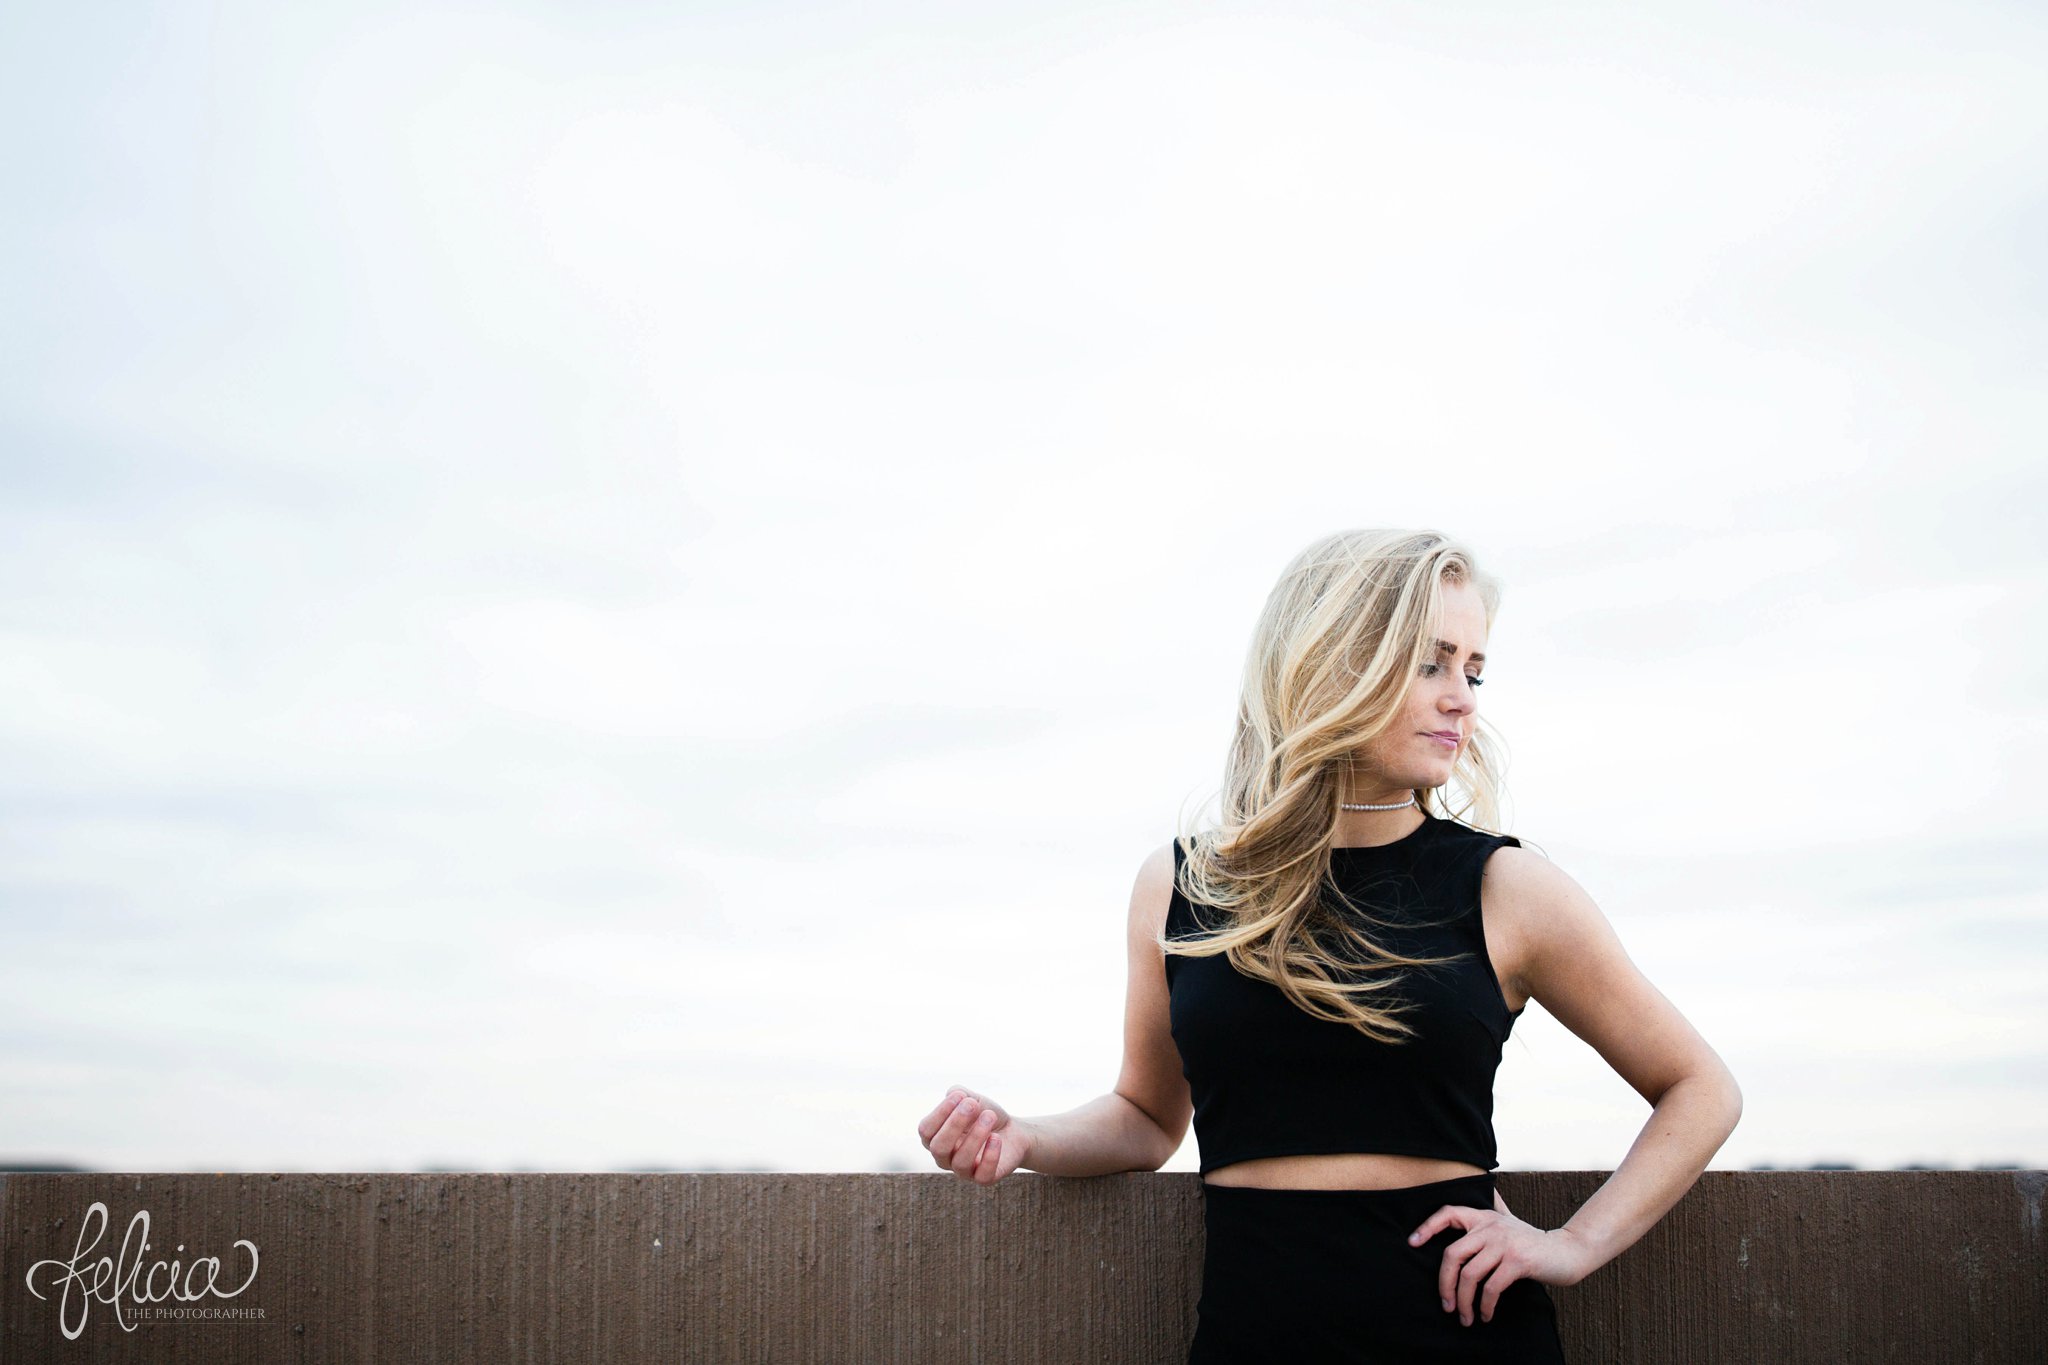 senior photos | senior photography | Lenexa | Kansas | images by feliciathephotographer.com | chic | dancer  | long blonde hair | hair flip | pearl jewelry | pearl necklace | pearl earrings | black outfit | dramatic pose | hand on hip | looking down  